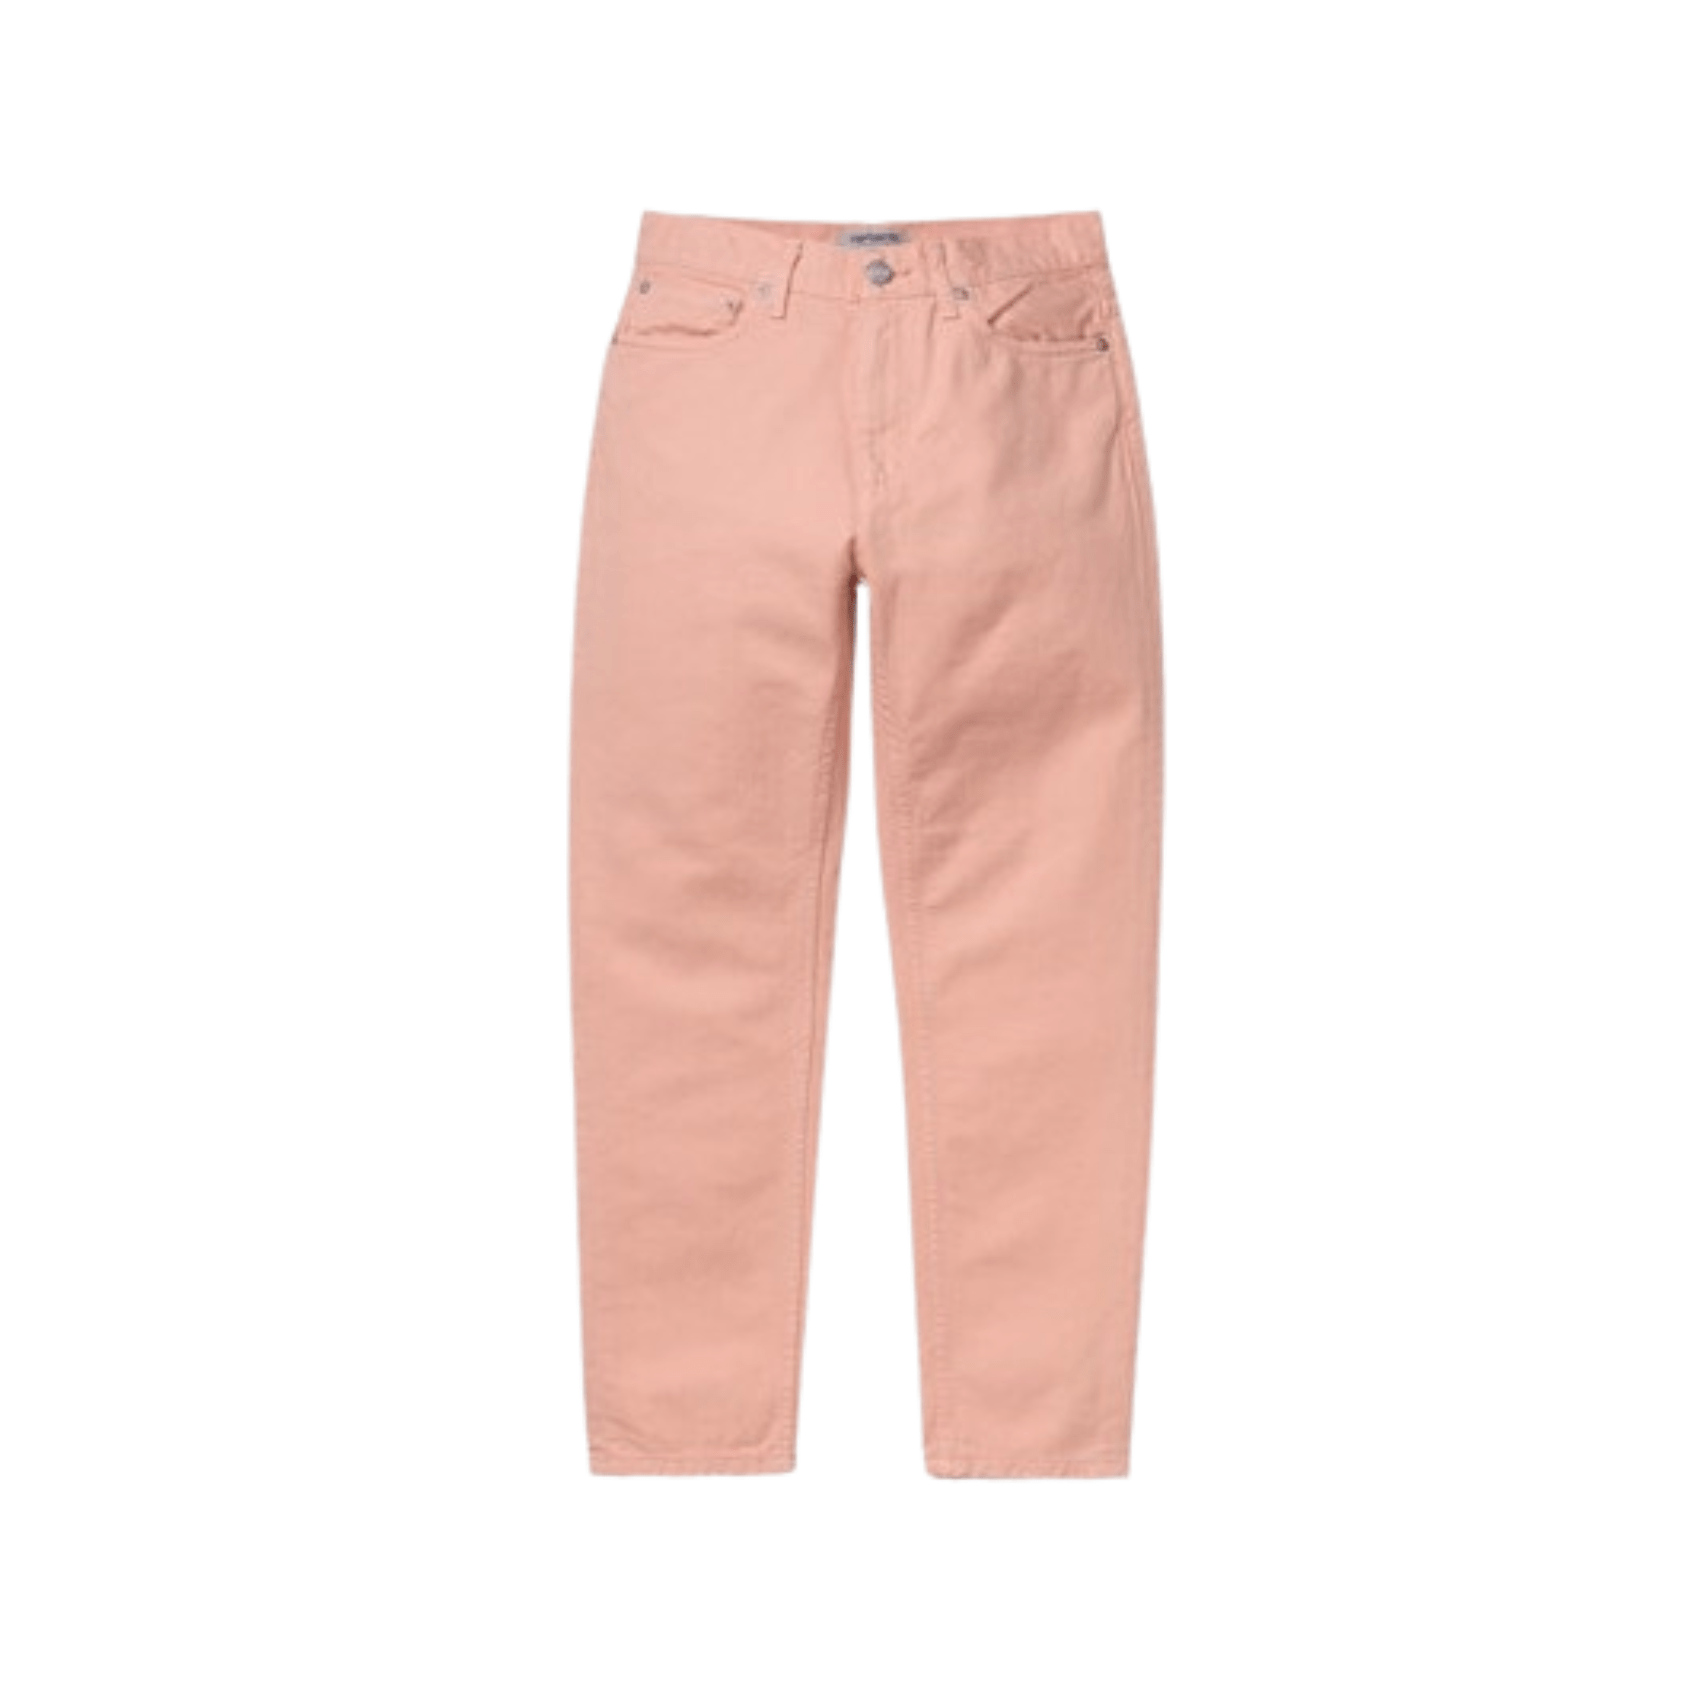 W Page Carrot Ankle Pant - Pink.